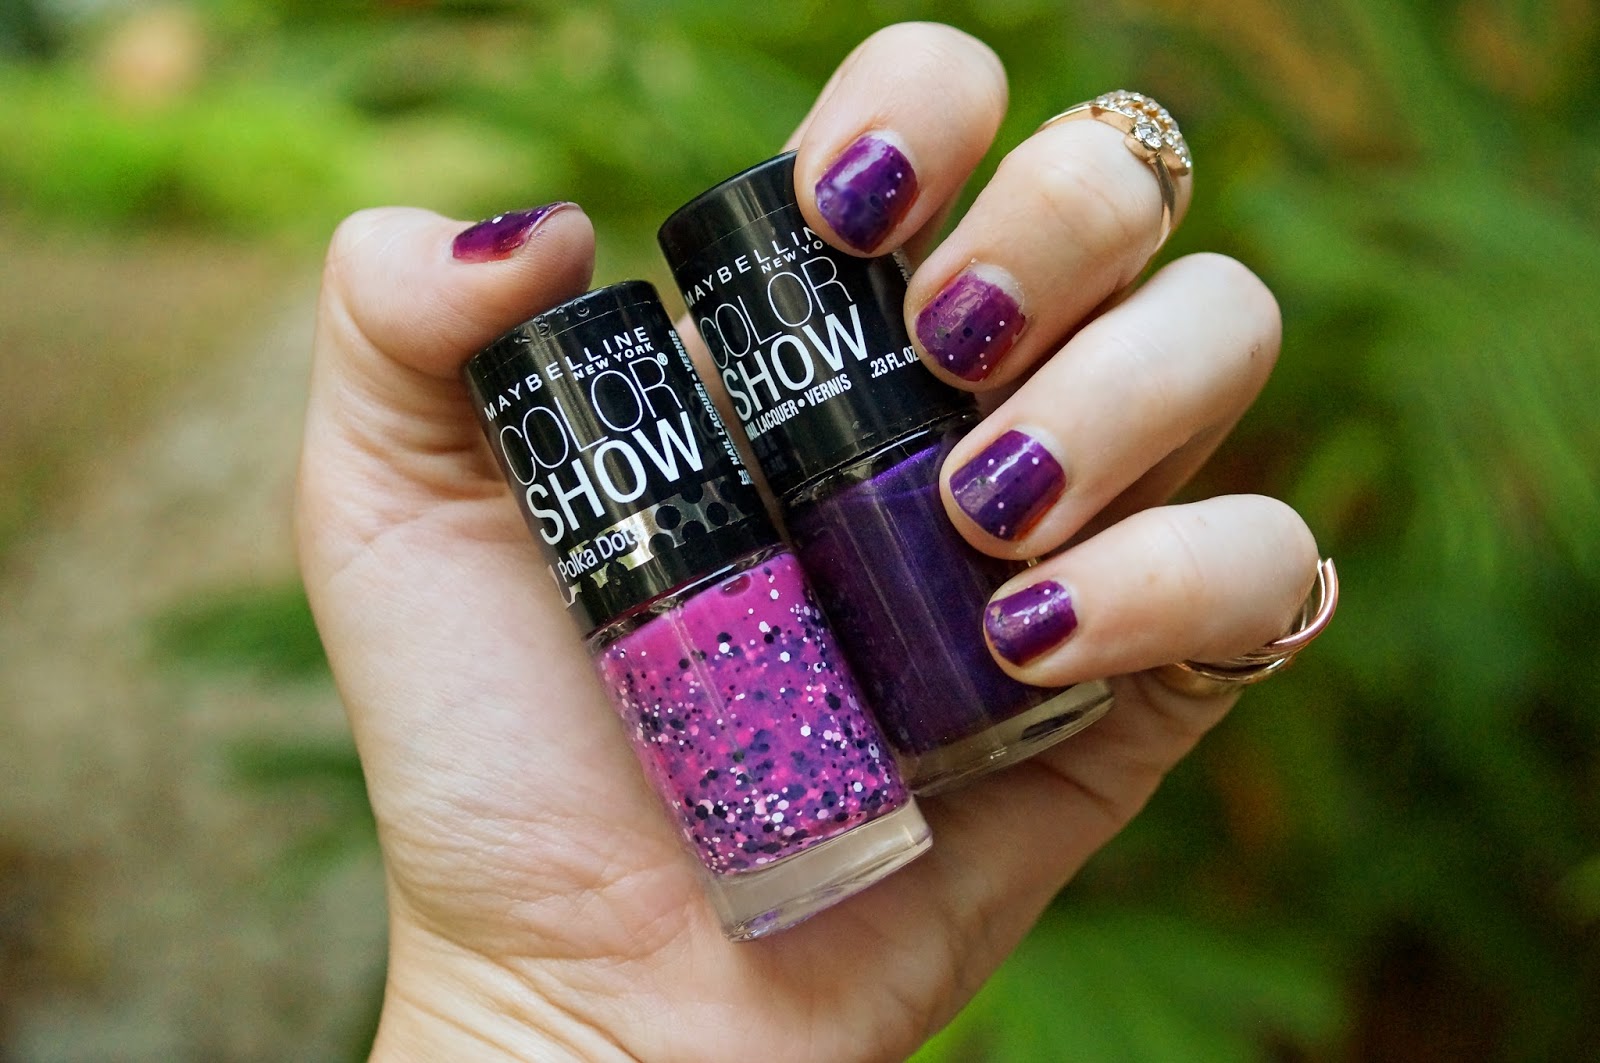 Maybelline's Color Show Nail Polish comes in beautiful colors and dries super fast!